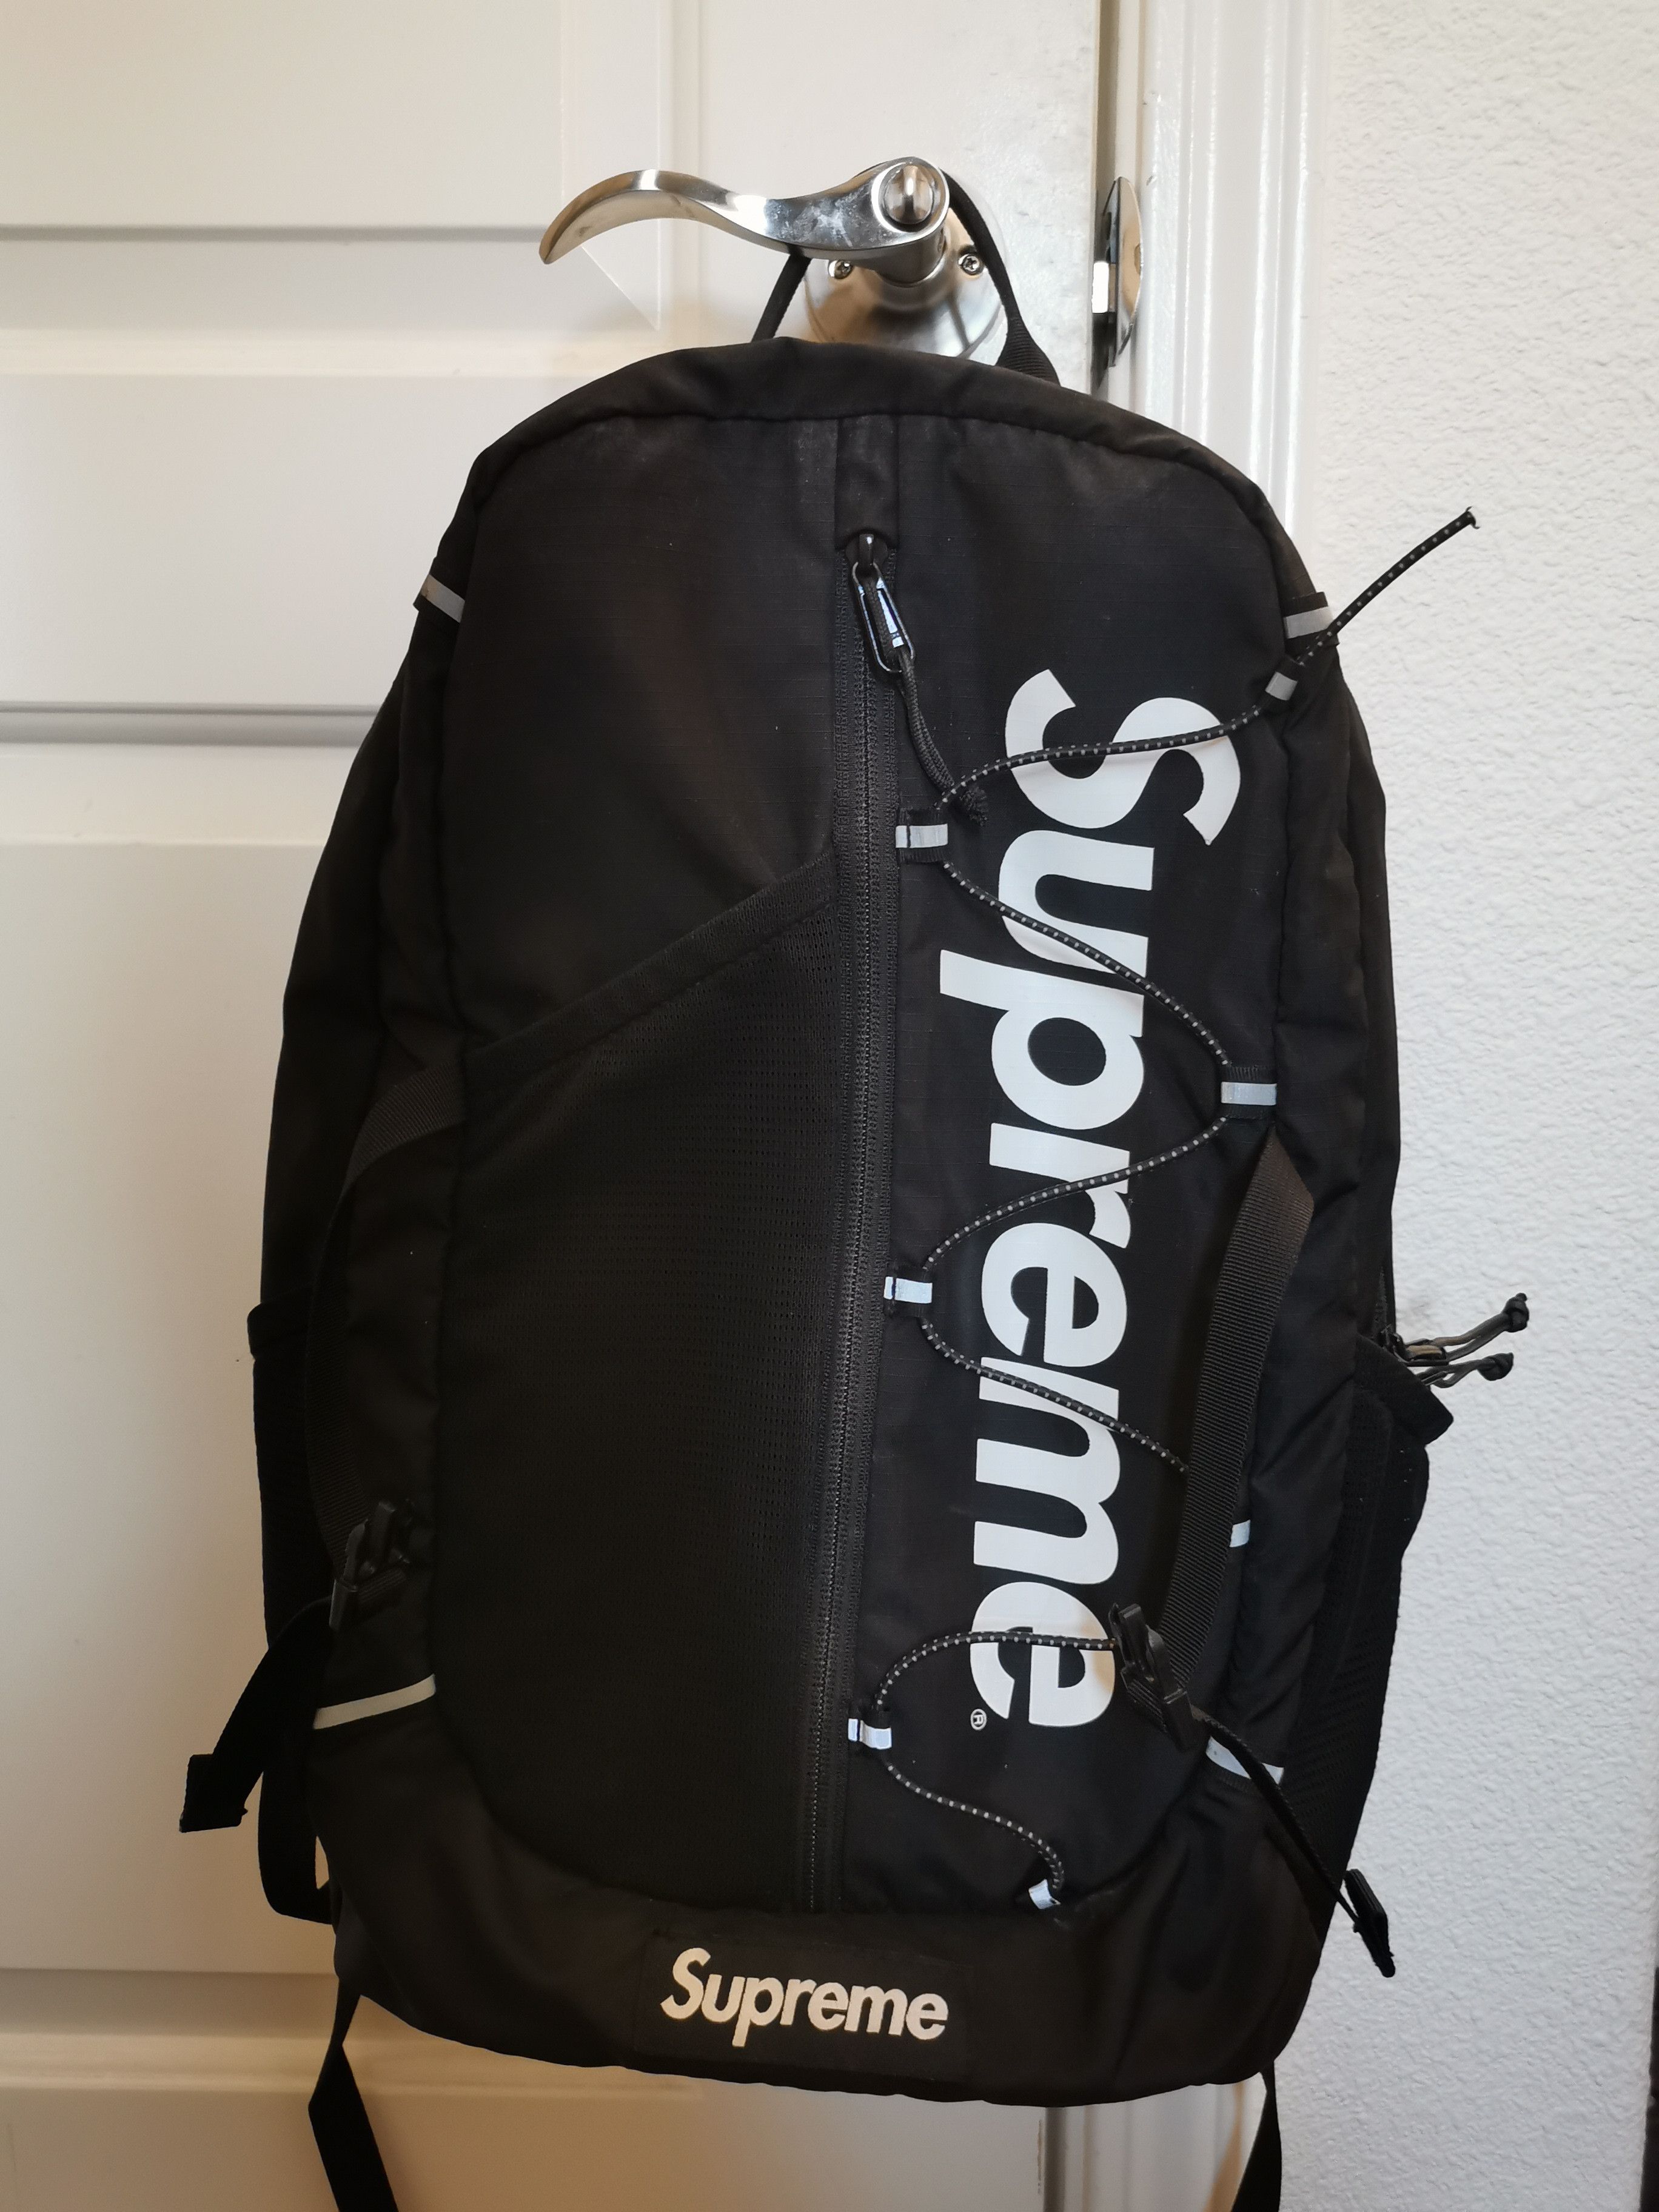 Supreme ] Supreme Backpack ss17 42th Student Couple Street New School Bags  - 11STREET